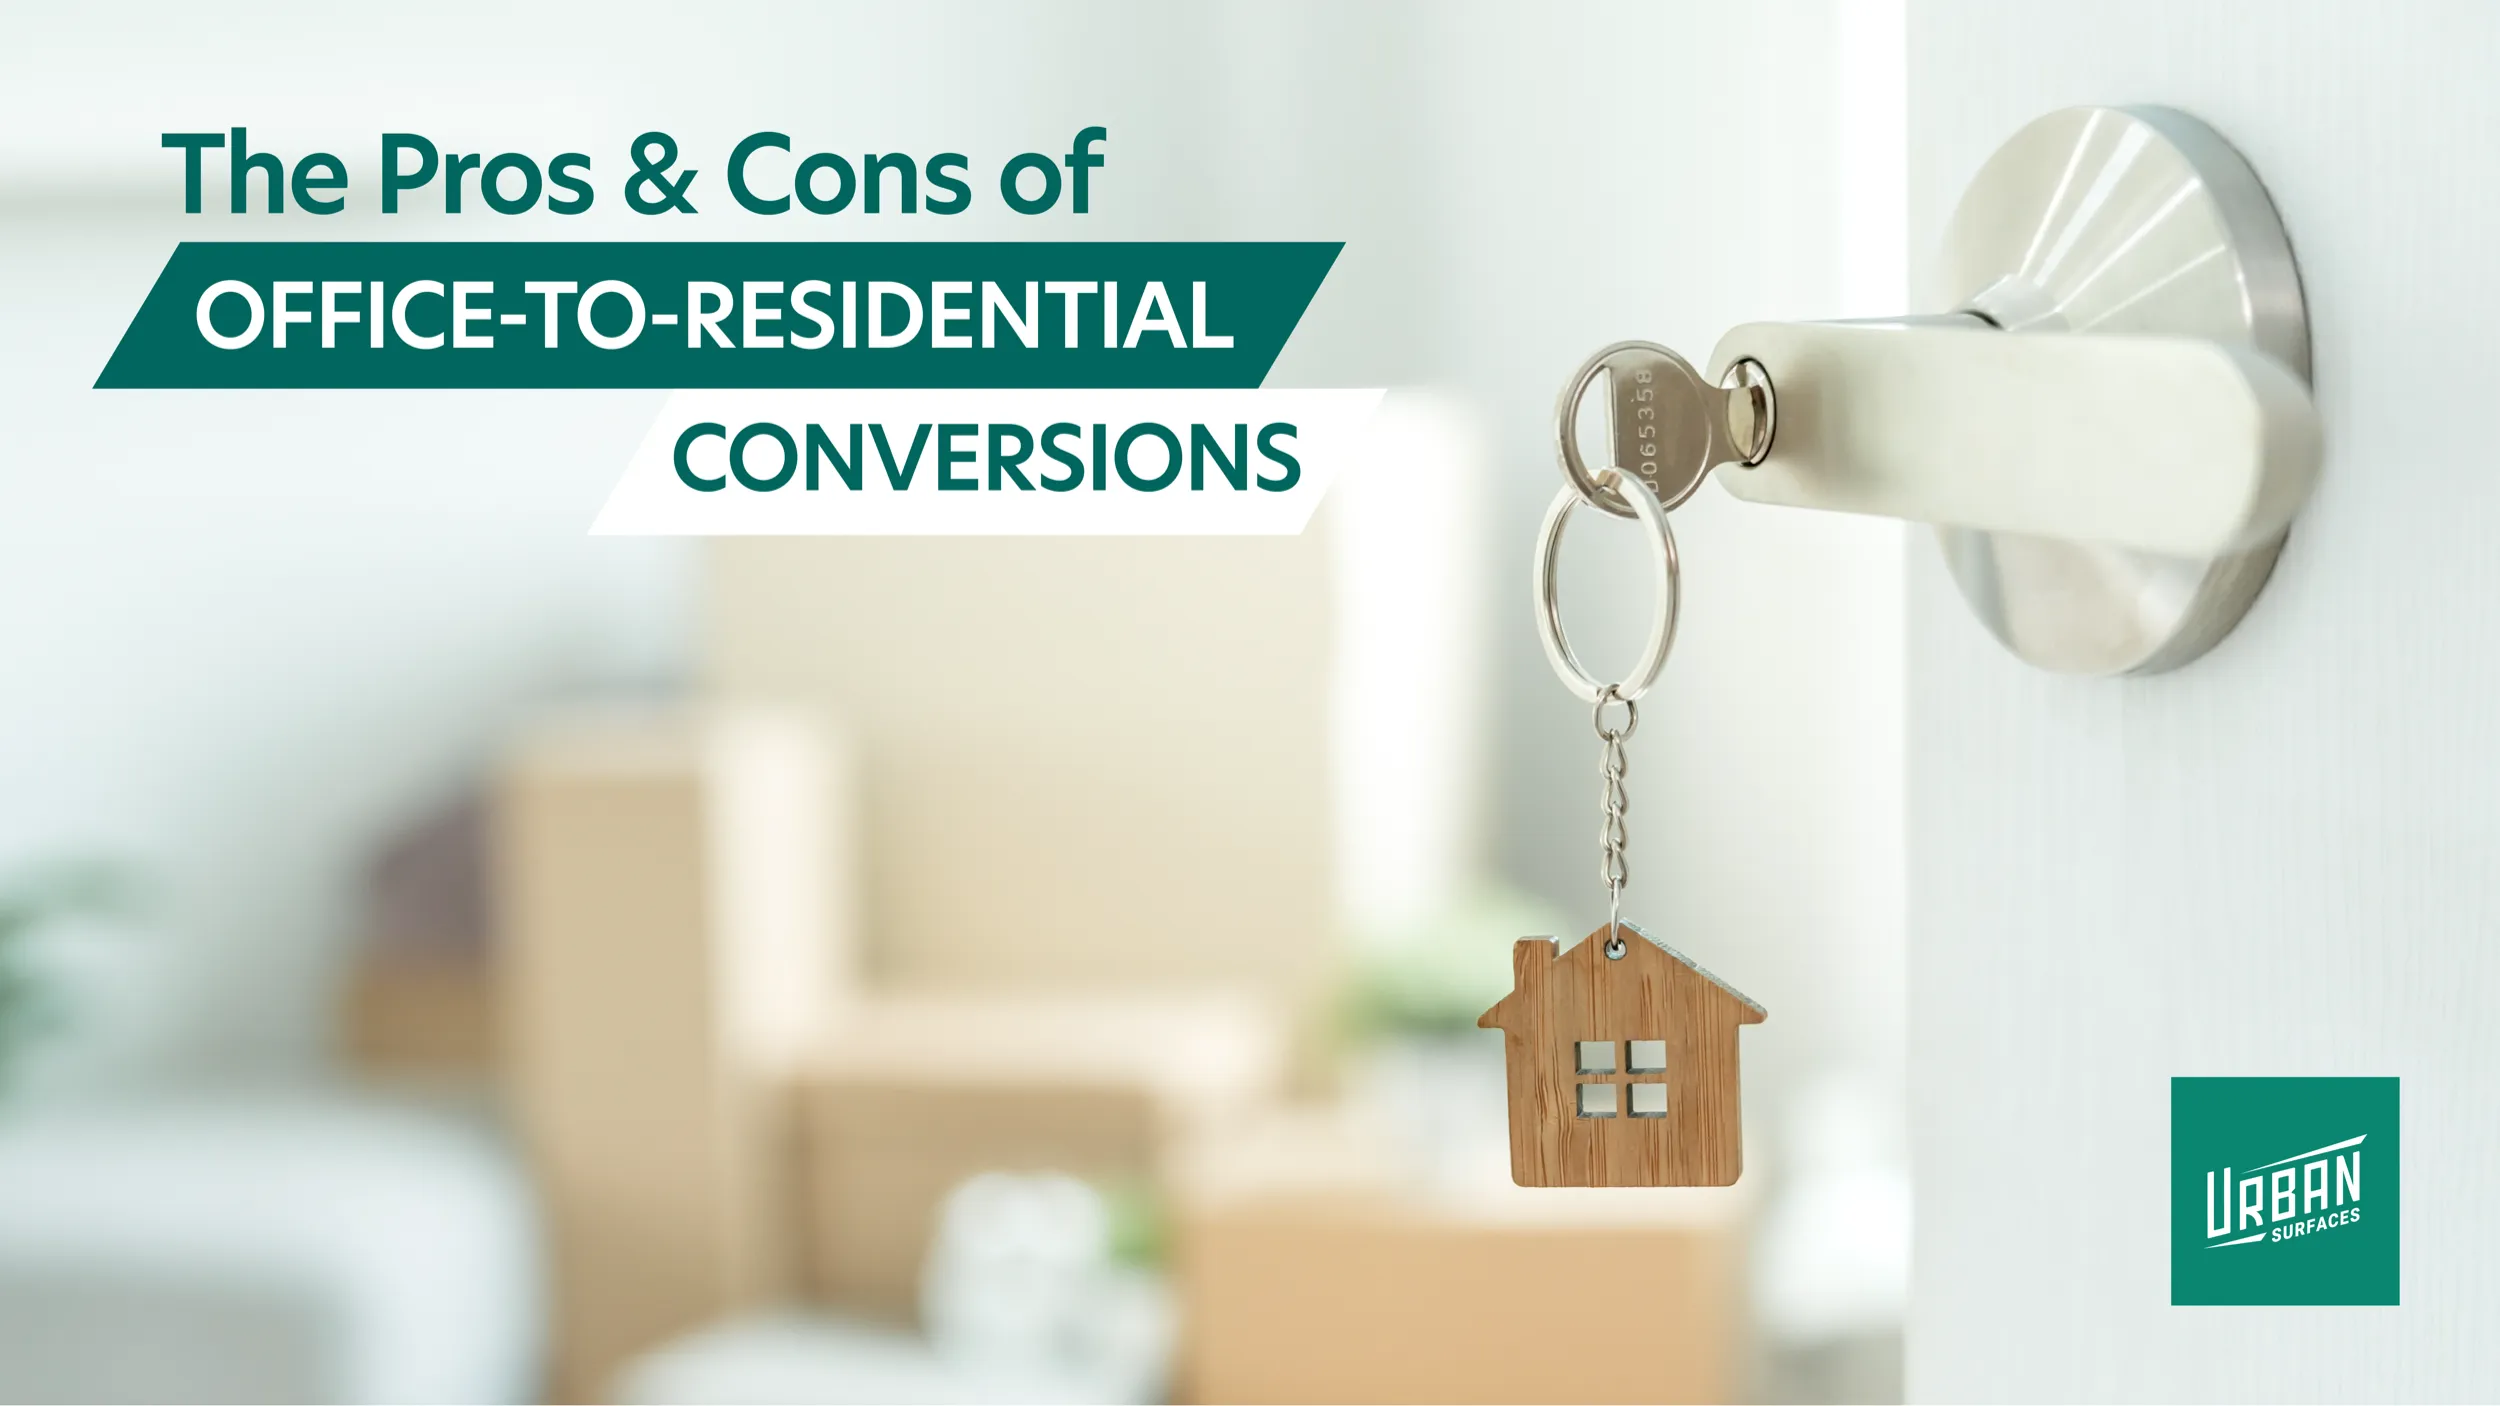 An image promoting the pros and cons of office-to-residential conversions, featuring a close-up of a door with a key and house-shaped keychain, indicating the transformation from office spaces to residential homes.